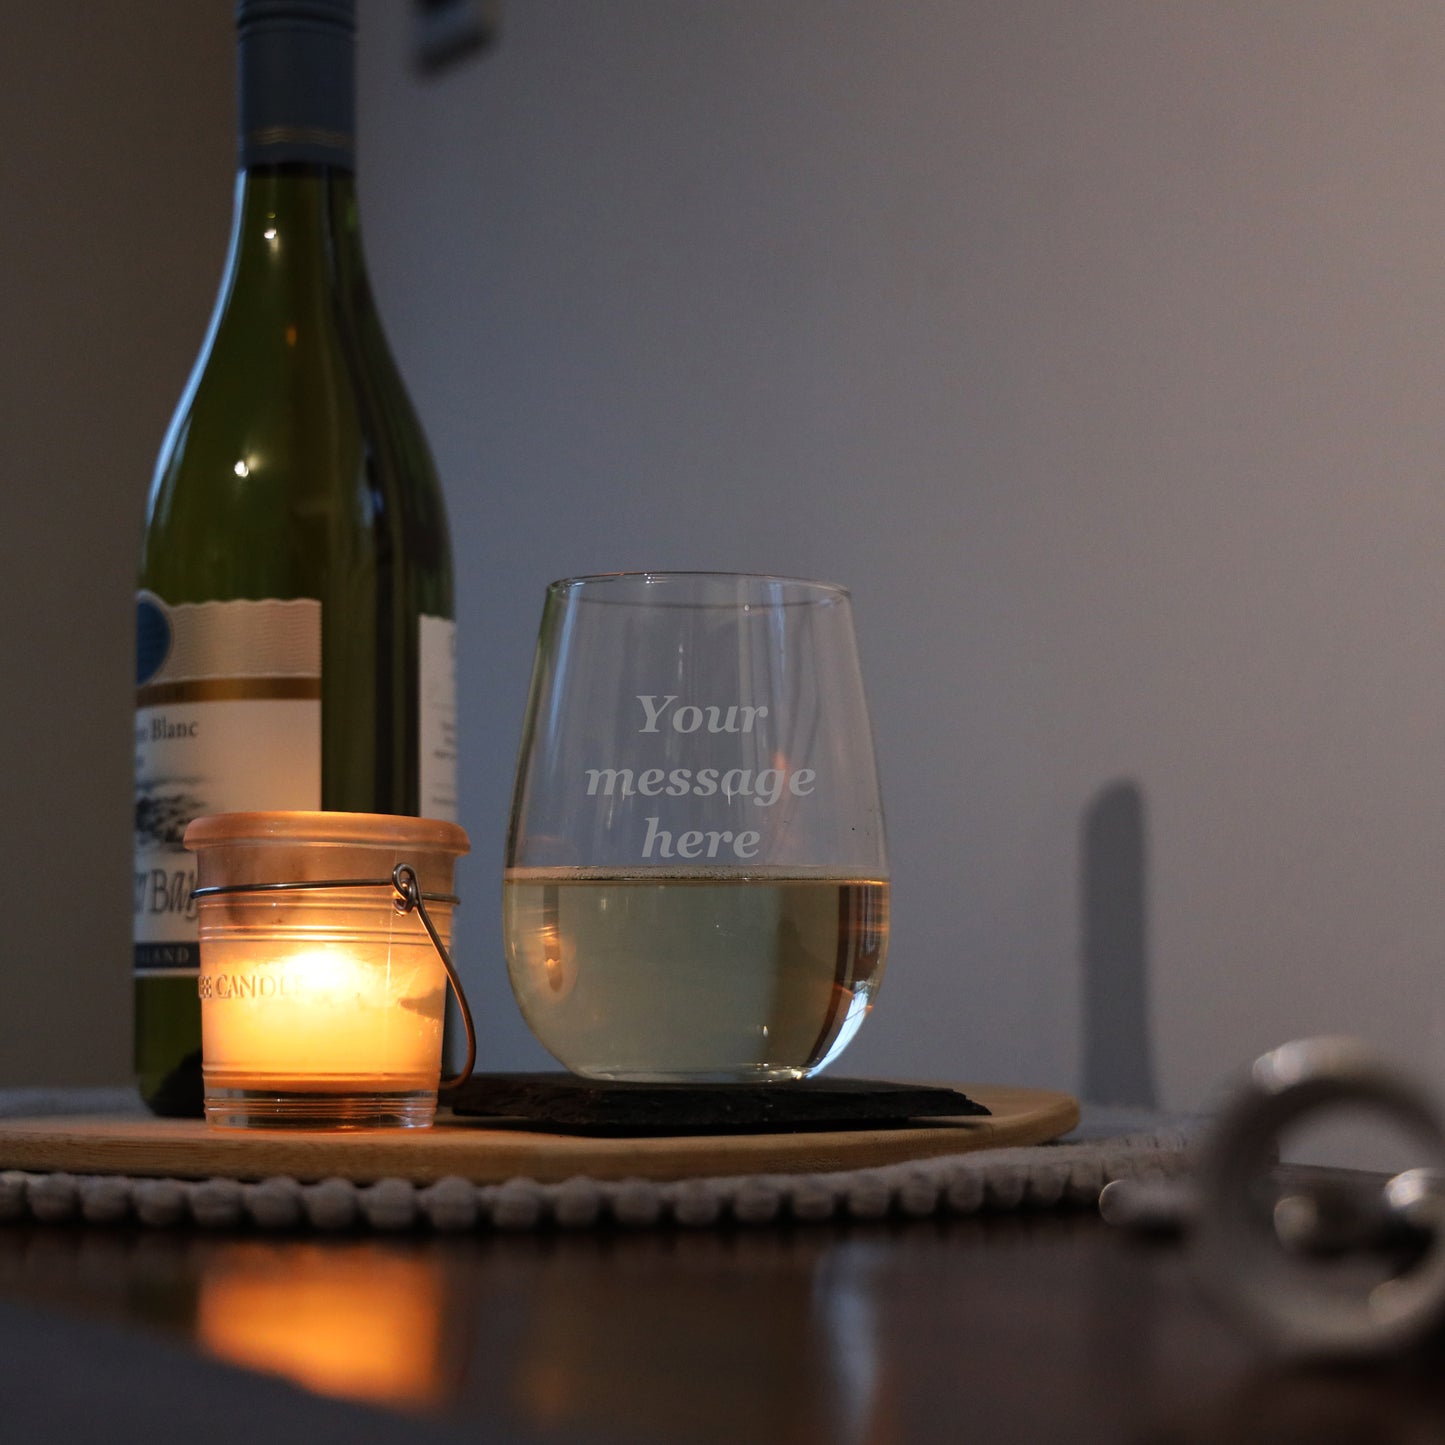 Create Your Own Stemless Personalised Engraved Stemless Wine Glass  - Always Looking Good -   